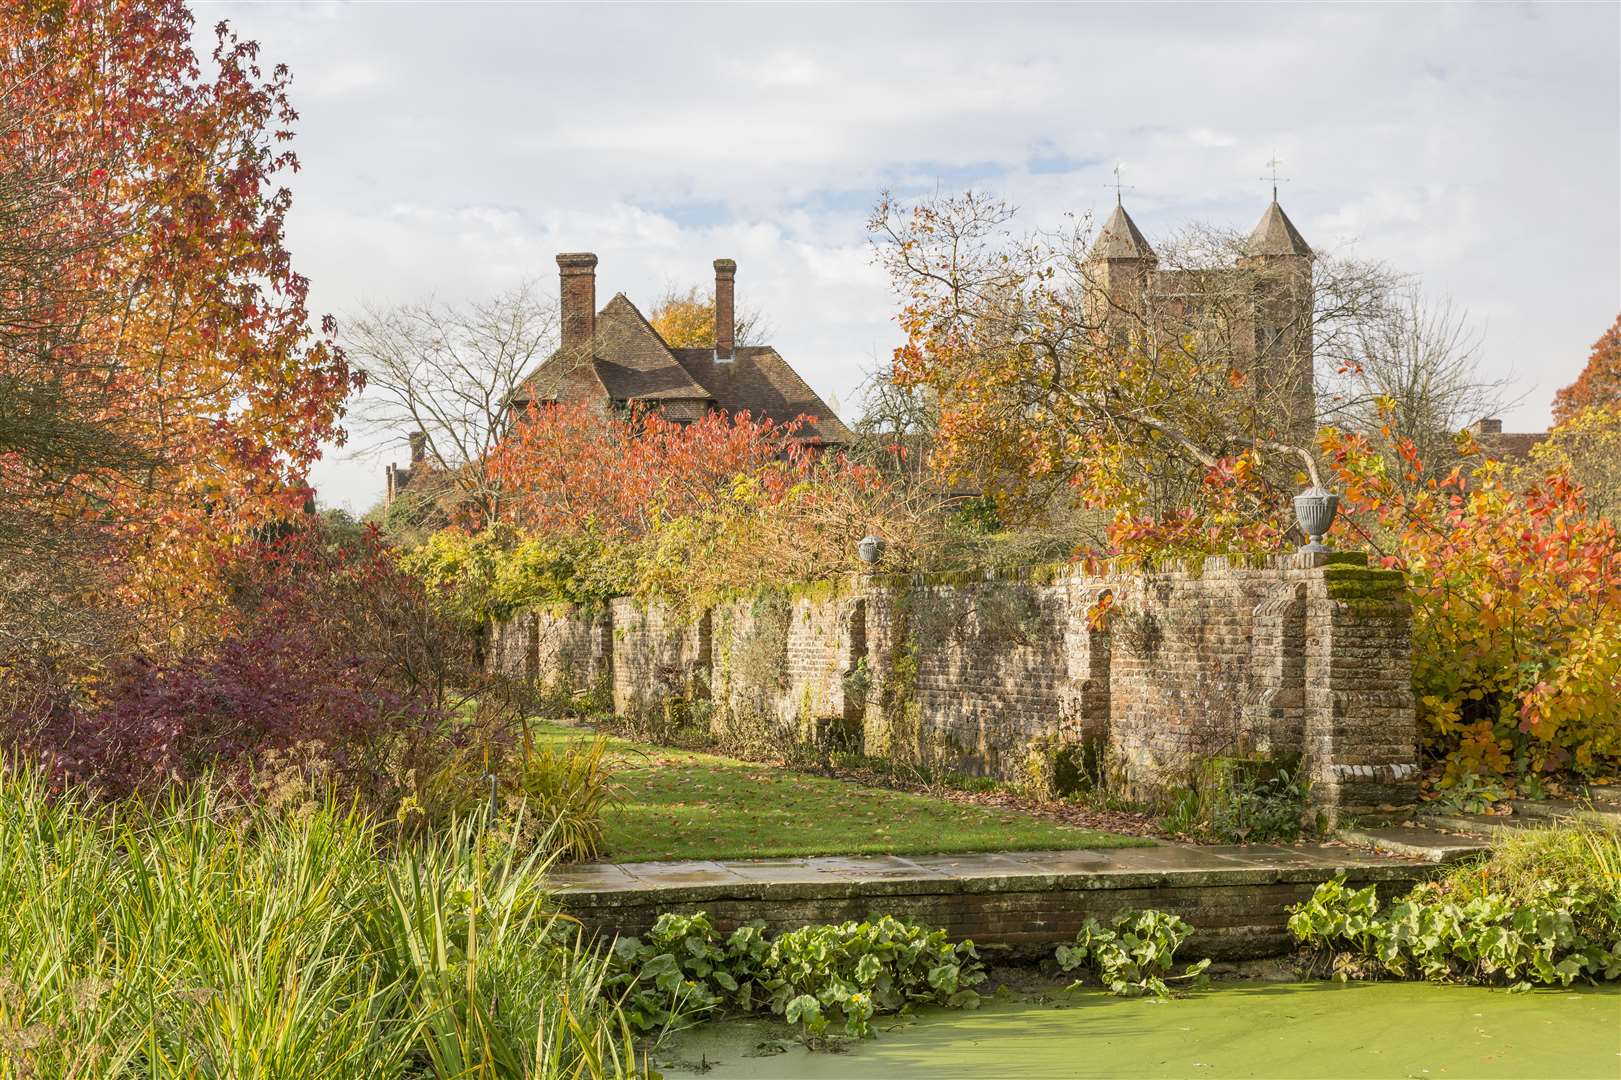 The gatehouse tower through the autumnal gardens at Sissinghurst Castle Garden Picture: National Trust/James Dobson